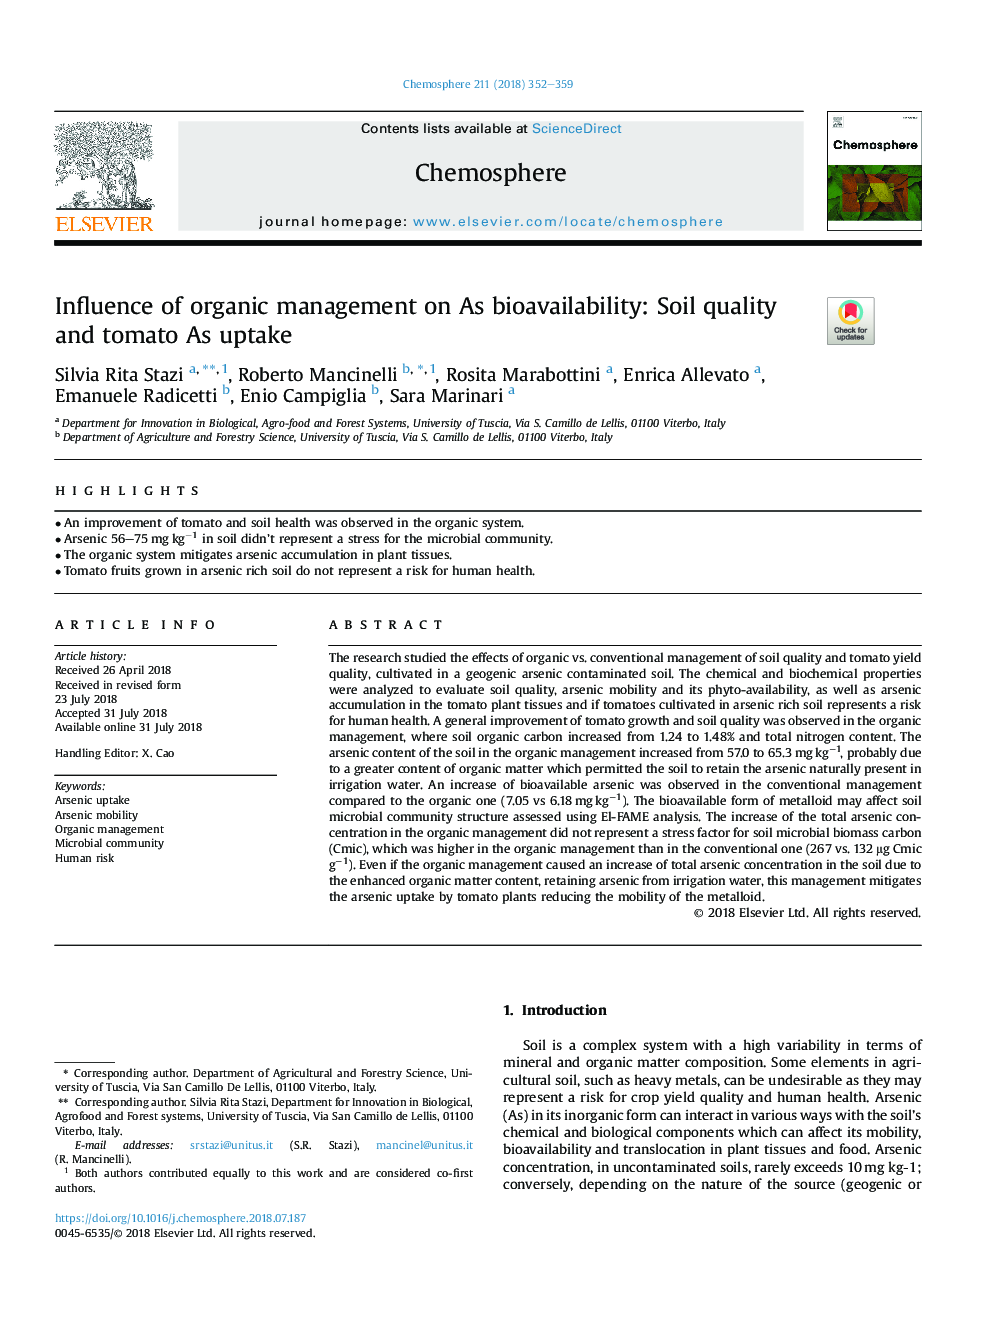 Influence of organic management on As bioavailability: Soil quality and tomato As uptake